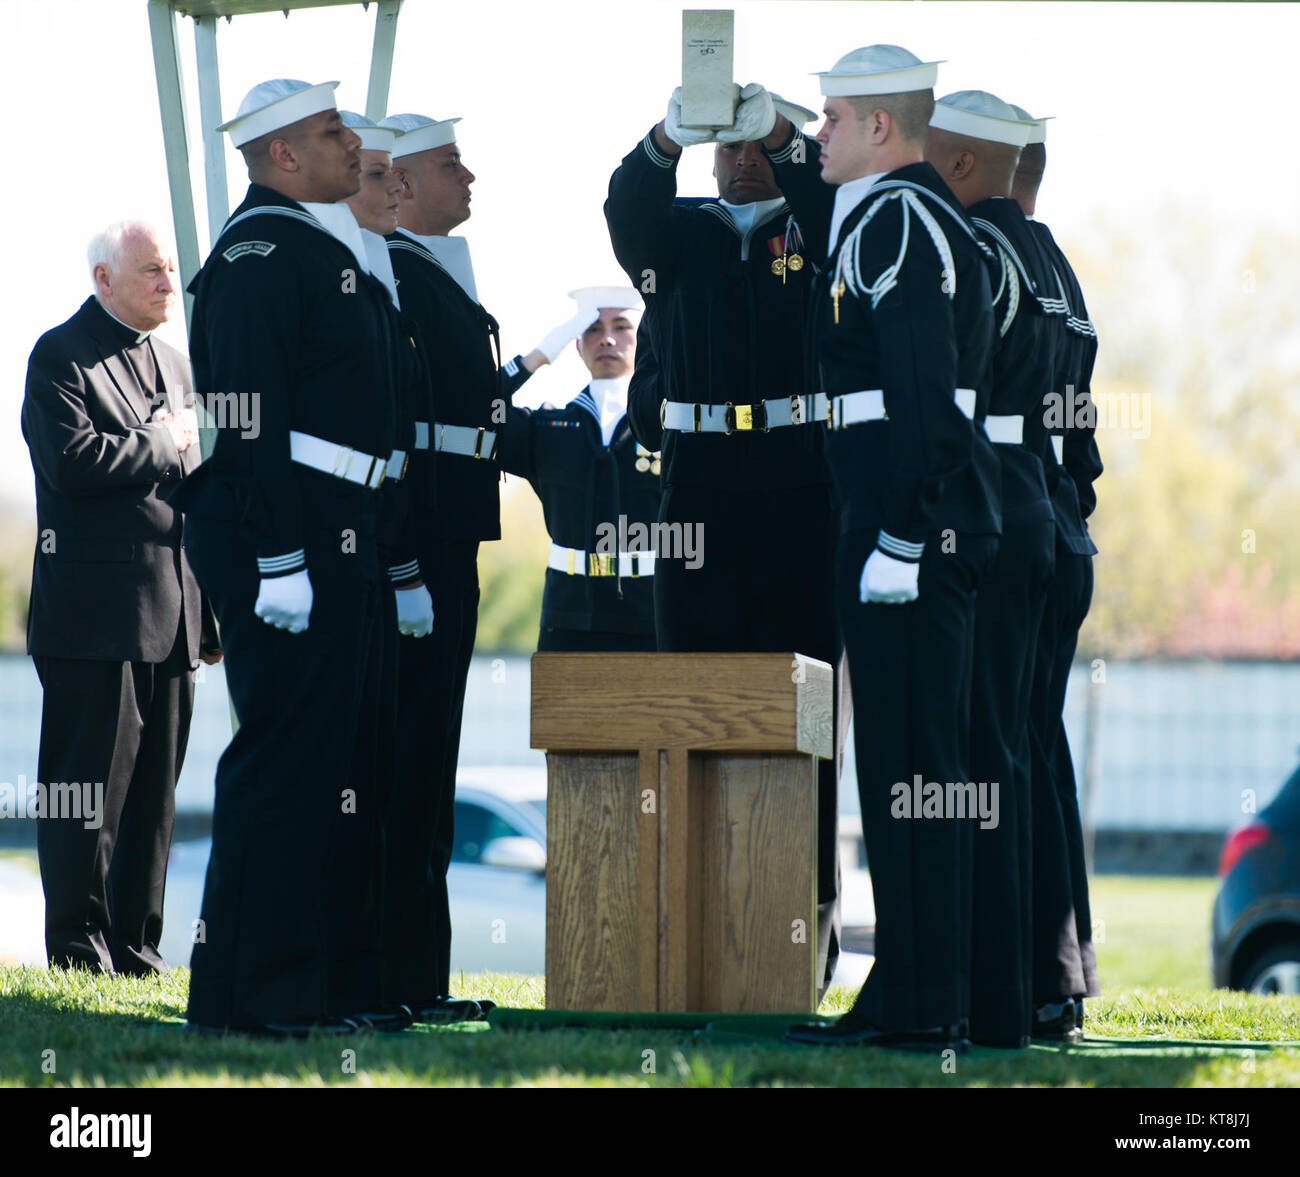 Sailors participate in the graveside service for U.S. Navy Petty Officer 3rd Class Charles Thomas Dougherty in Arlington National Cemetery, April 18, 2016, in Arlington, Va. Dougherty was inurned in ANC’s Columbarium Court 9. (U.S. Army photo Rachel Larue/Arlington National Cemetery/Rachel Larue) Stock Photo